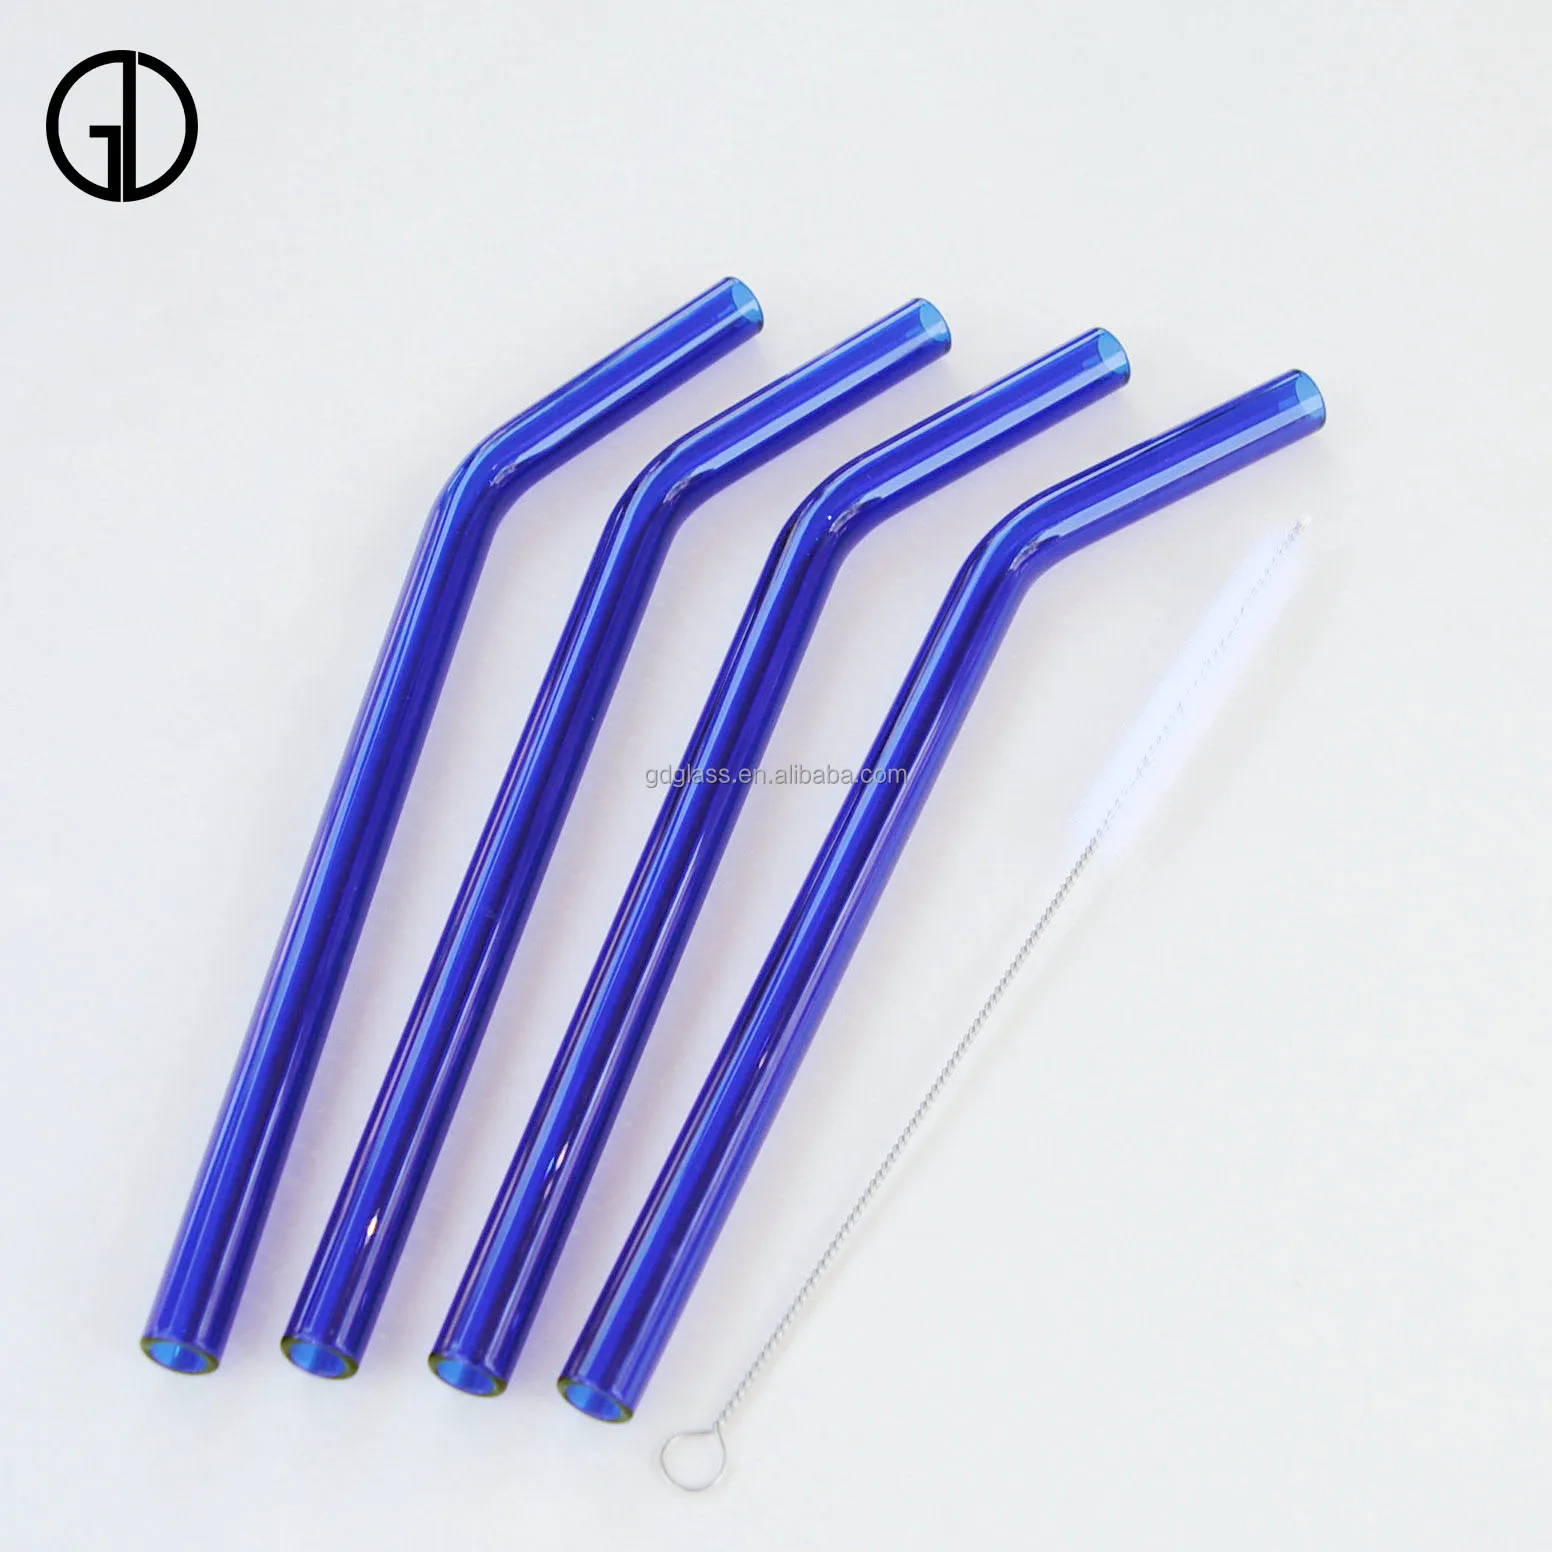 

Factory direct price discount reusable Durable fashion bent glass straws, Jade white transparent black teal yellow